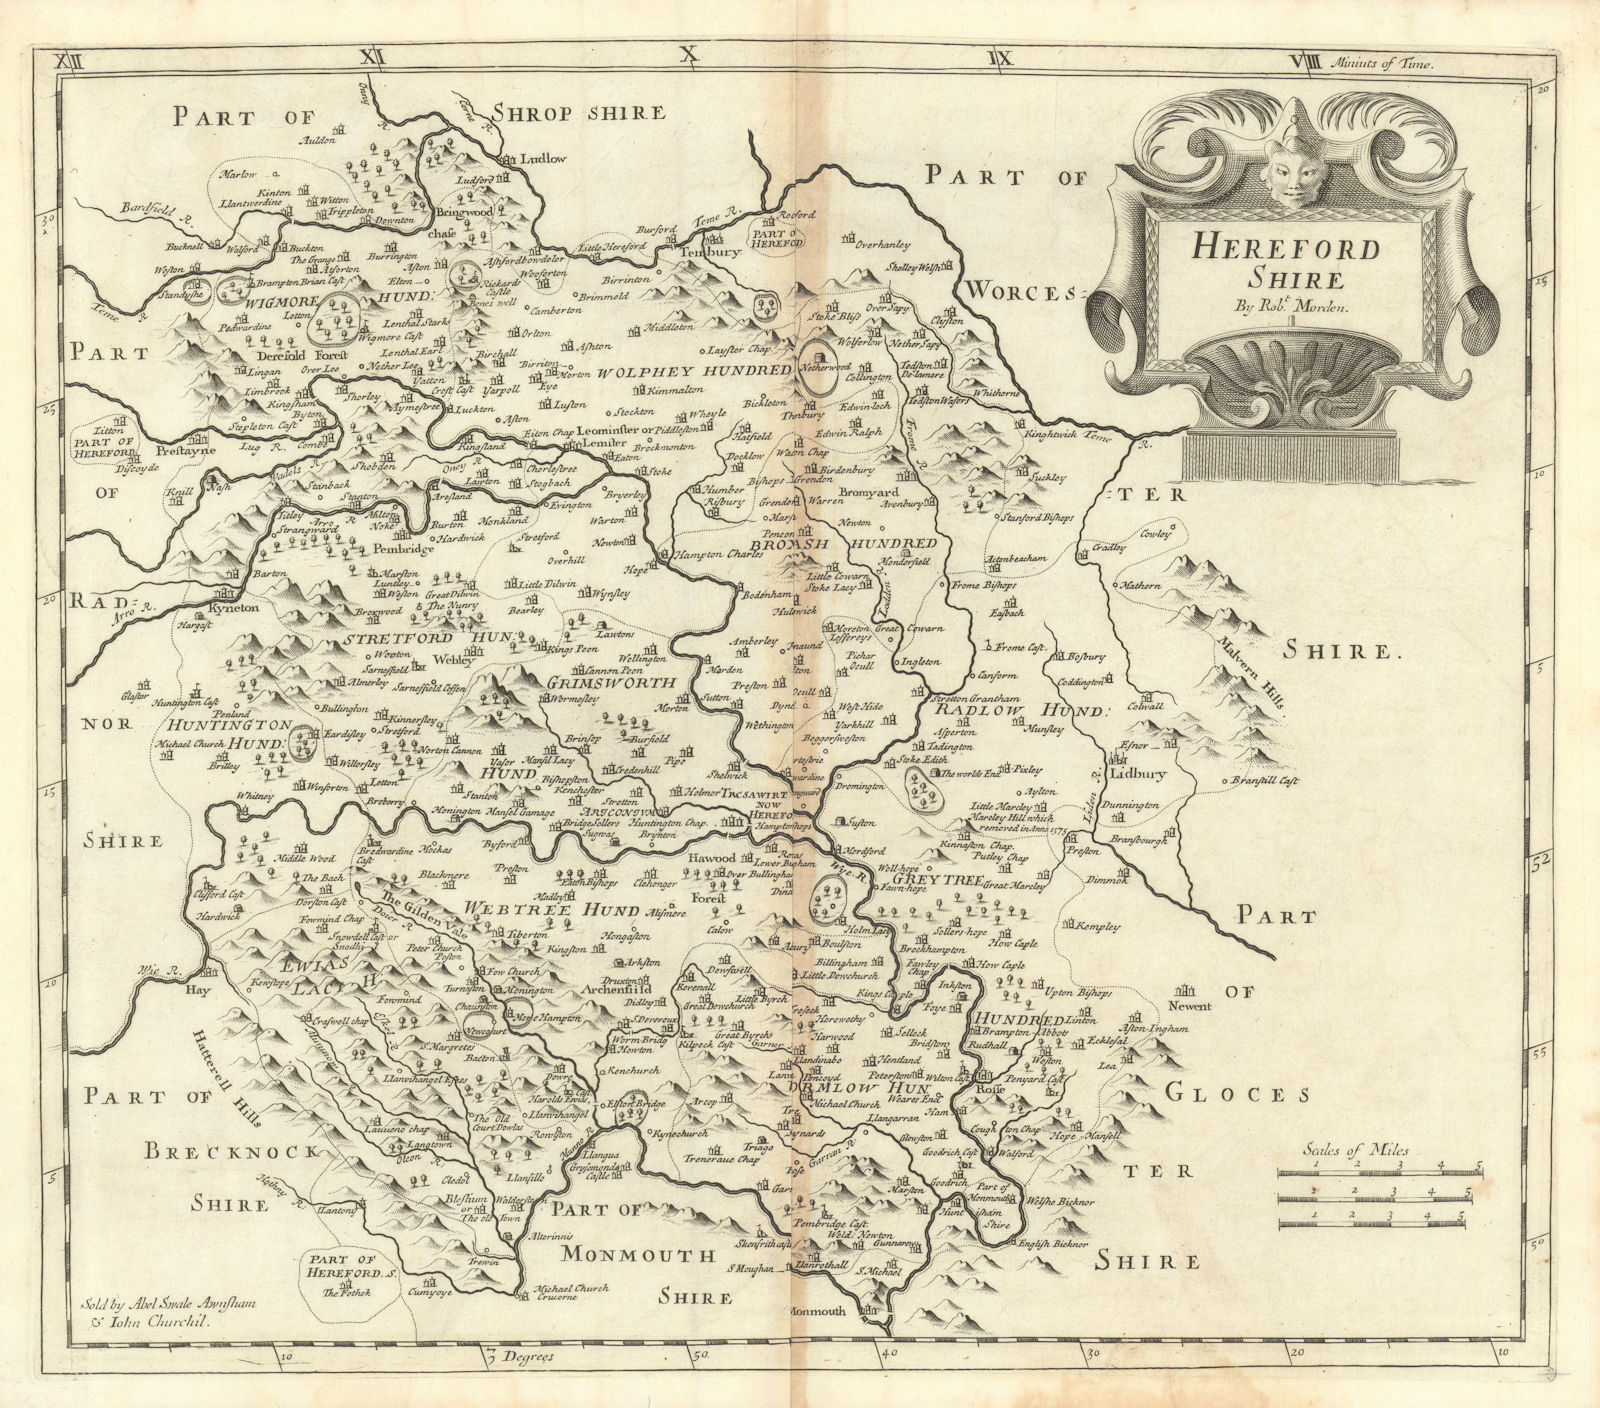 Herefordshire. 'HEREFORD SHIRE' by ROBERT MORDEN. Camden's Britannia 1695 map